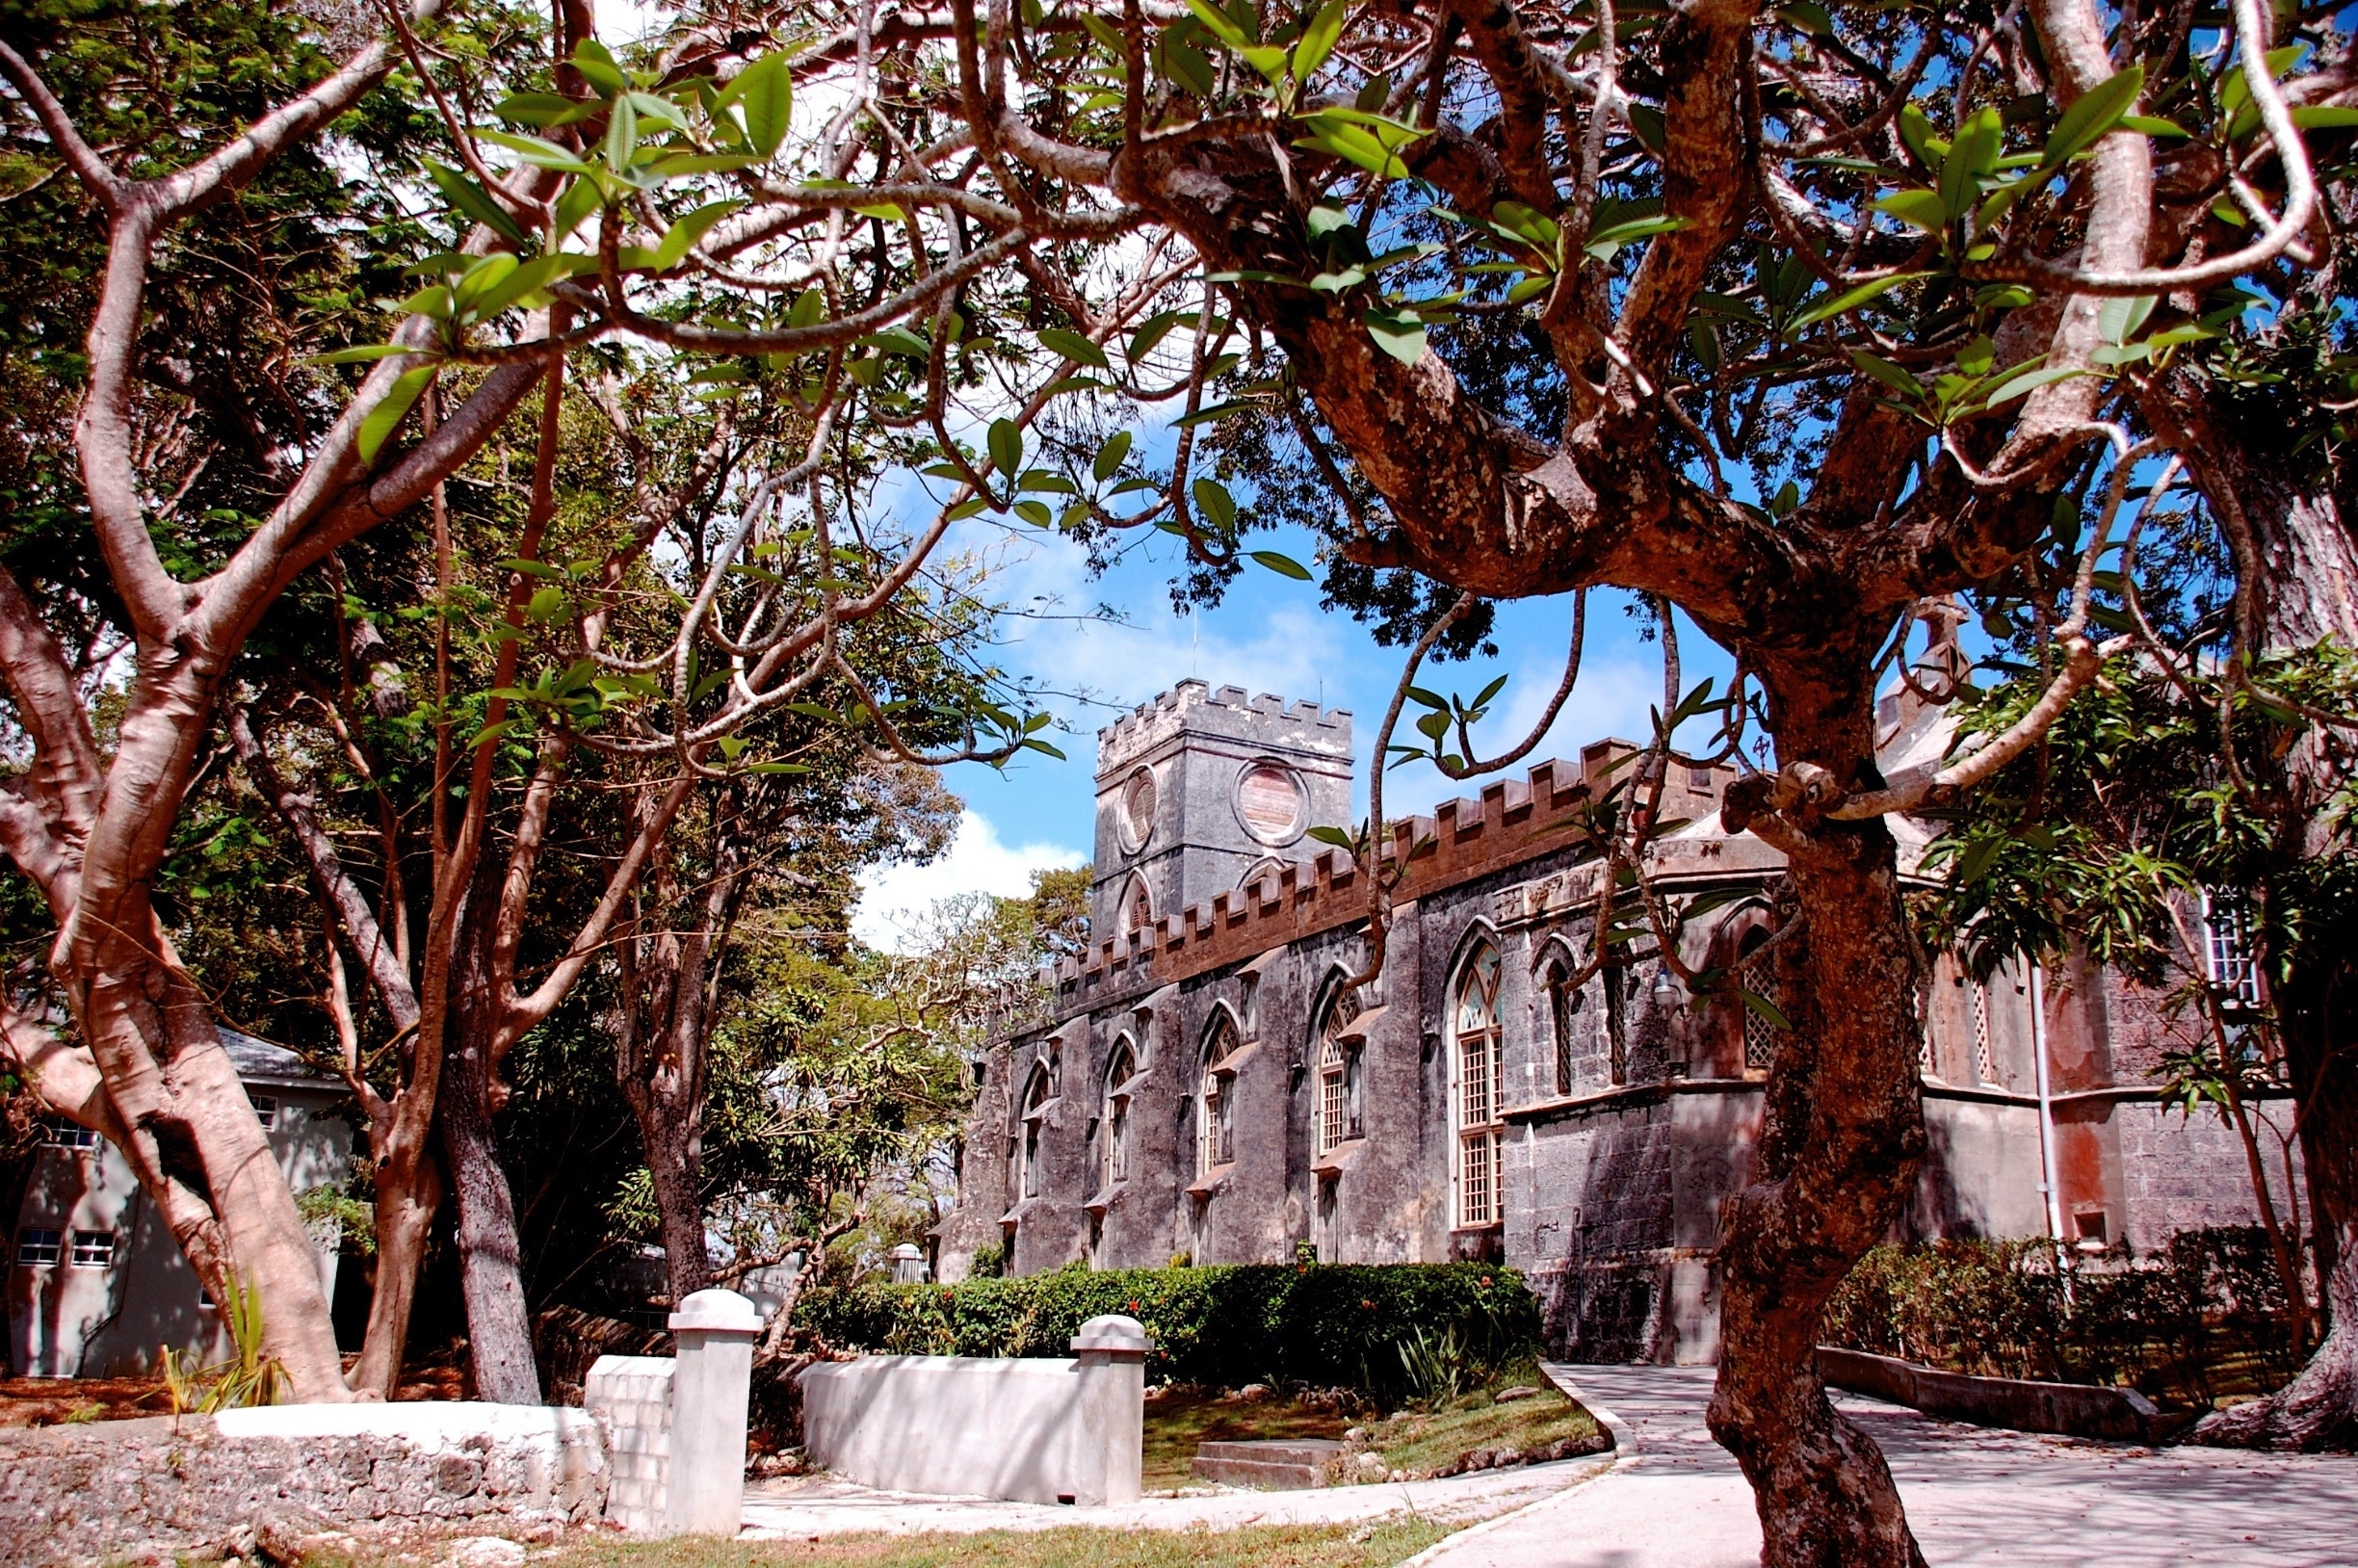 St John's parish church in Barbados. Originally built in 1645 destroyed by fire then rebuilt and destroyed by a hurricane and rebuild in its present form in the 1800's 
There are beautiful views from the church yard of the east coast of Barbados 